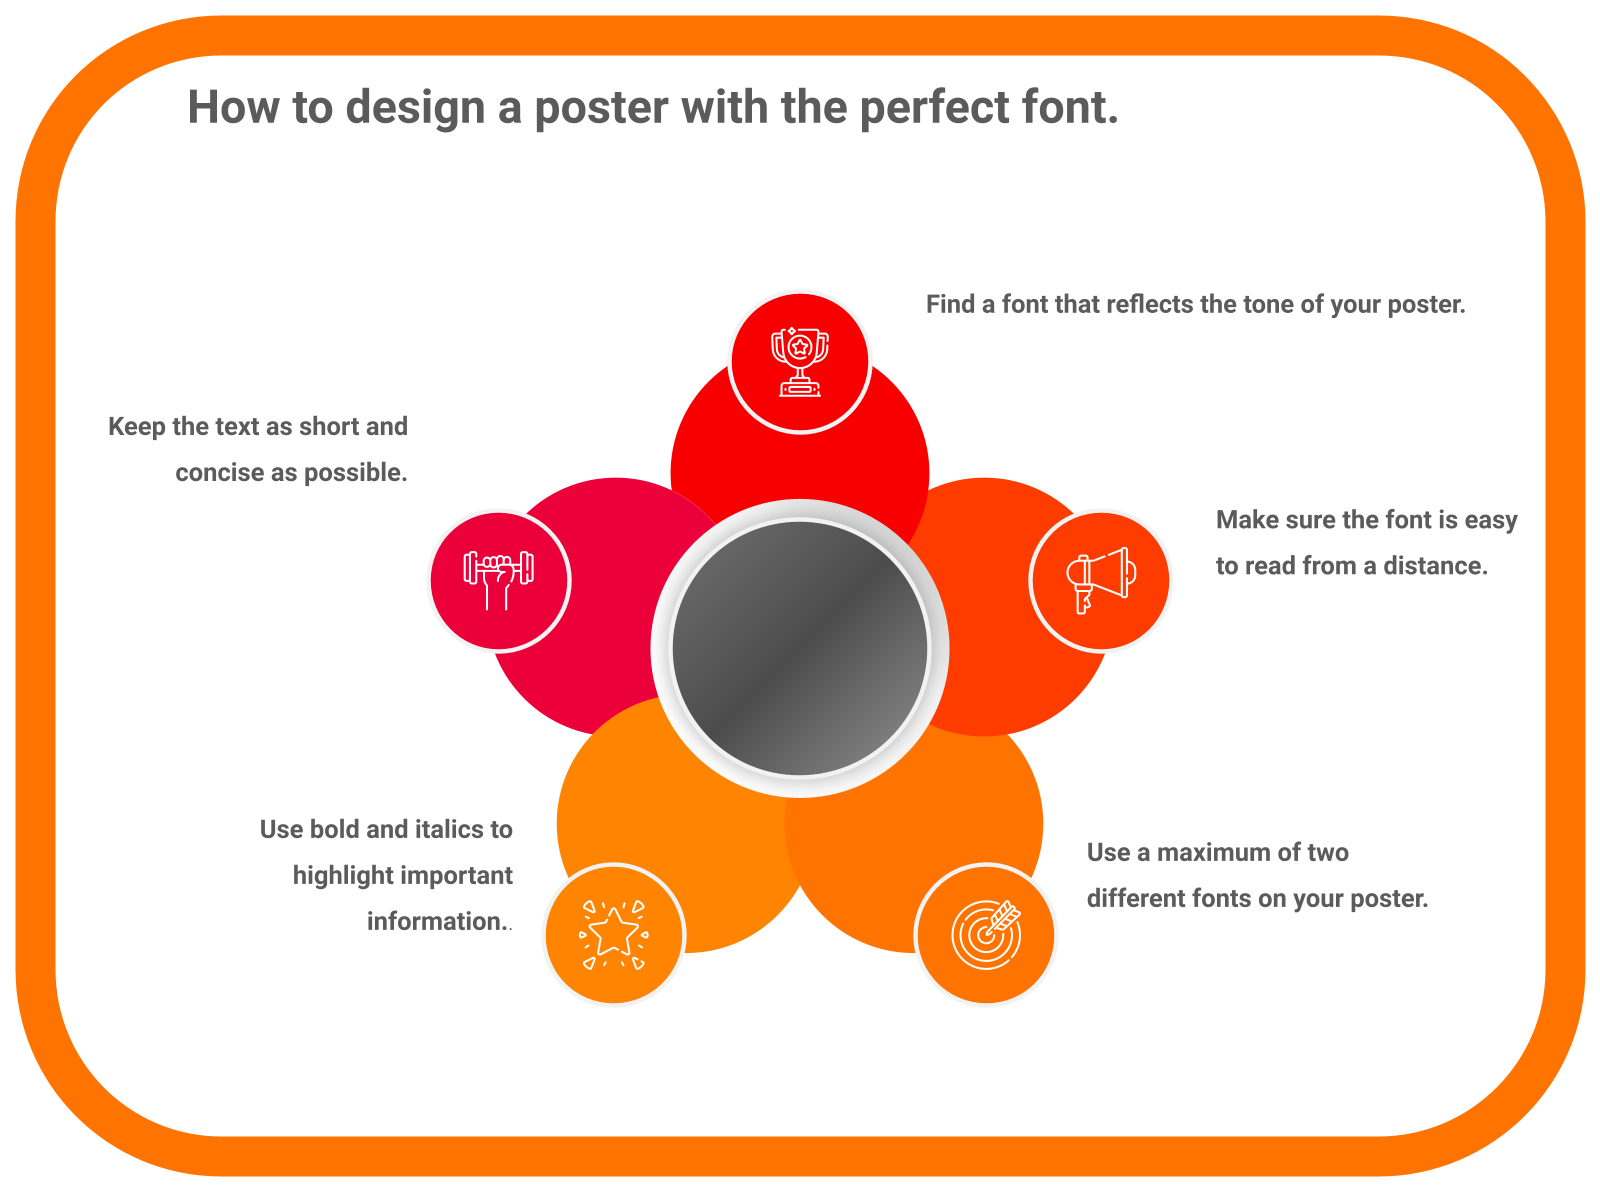 How to design a poster with the perfect font.